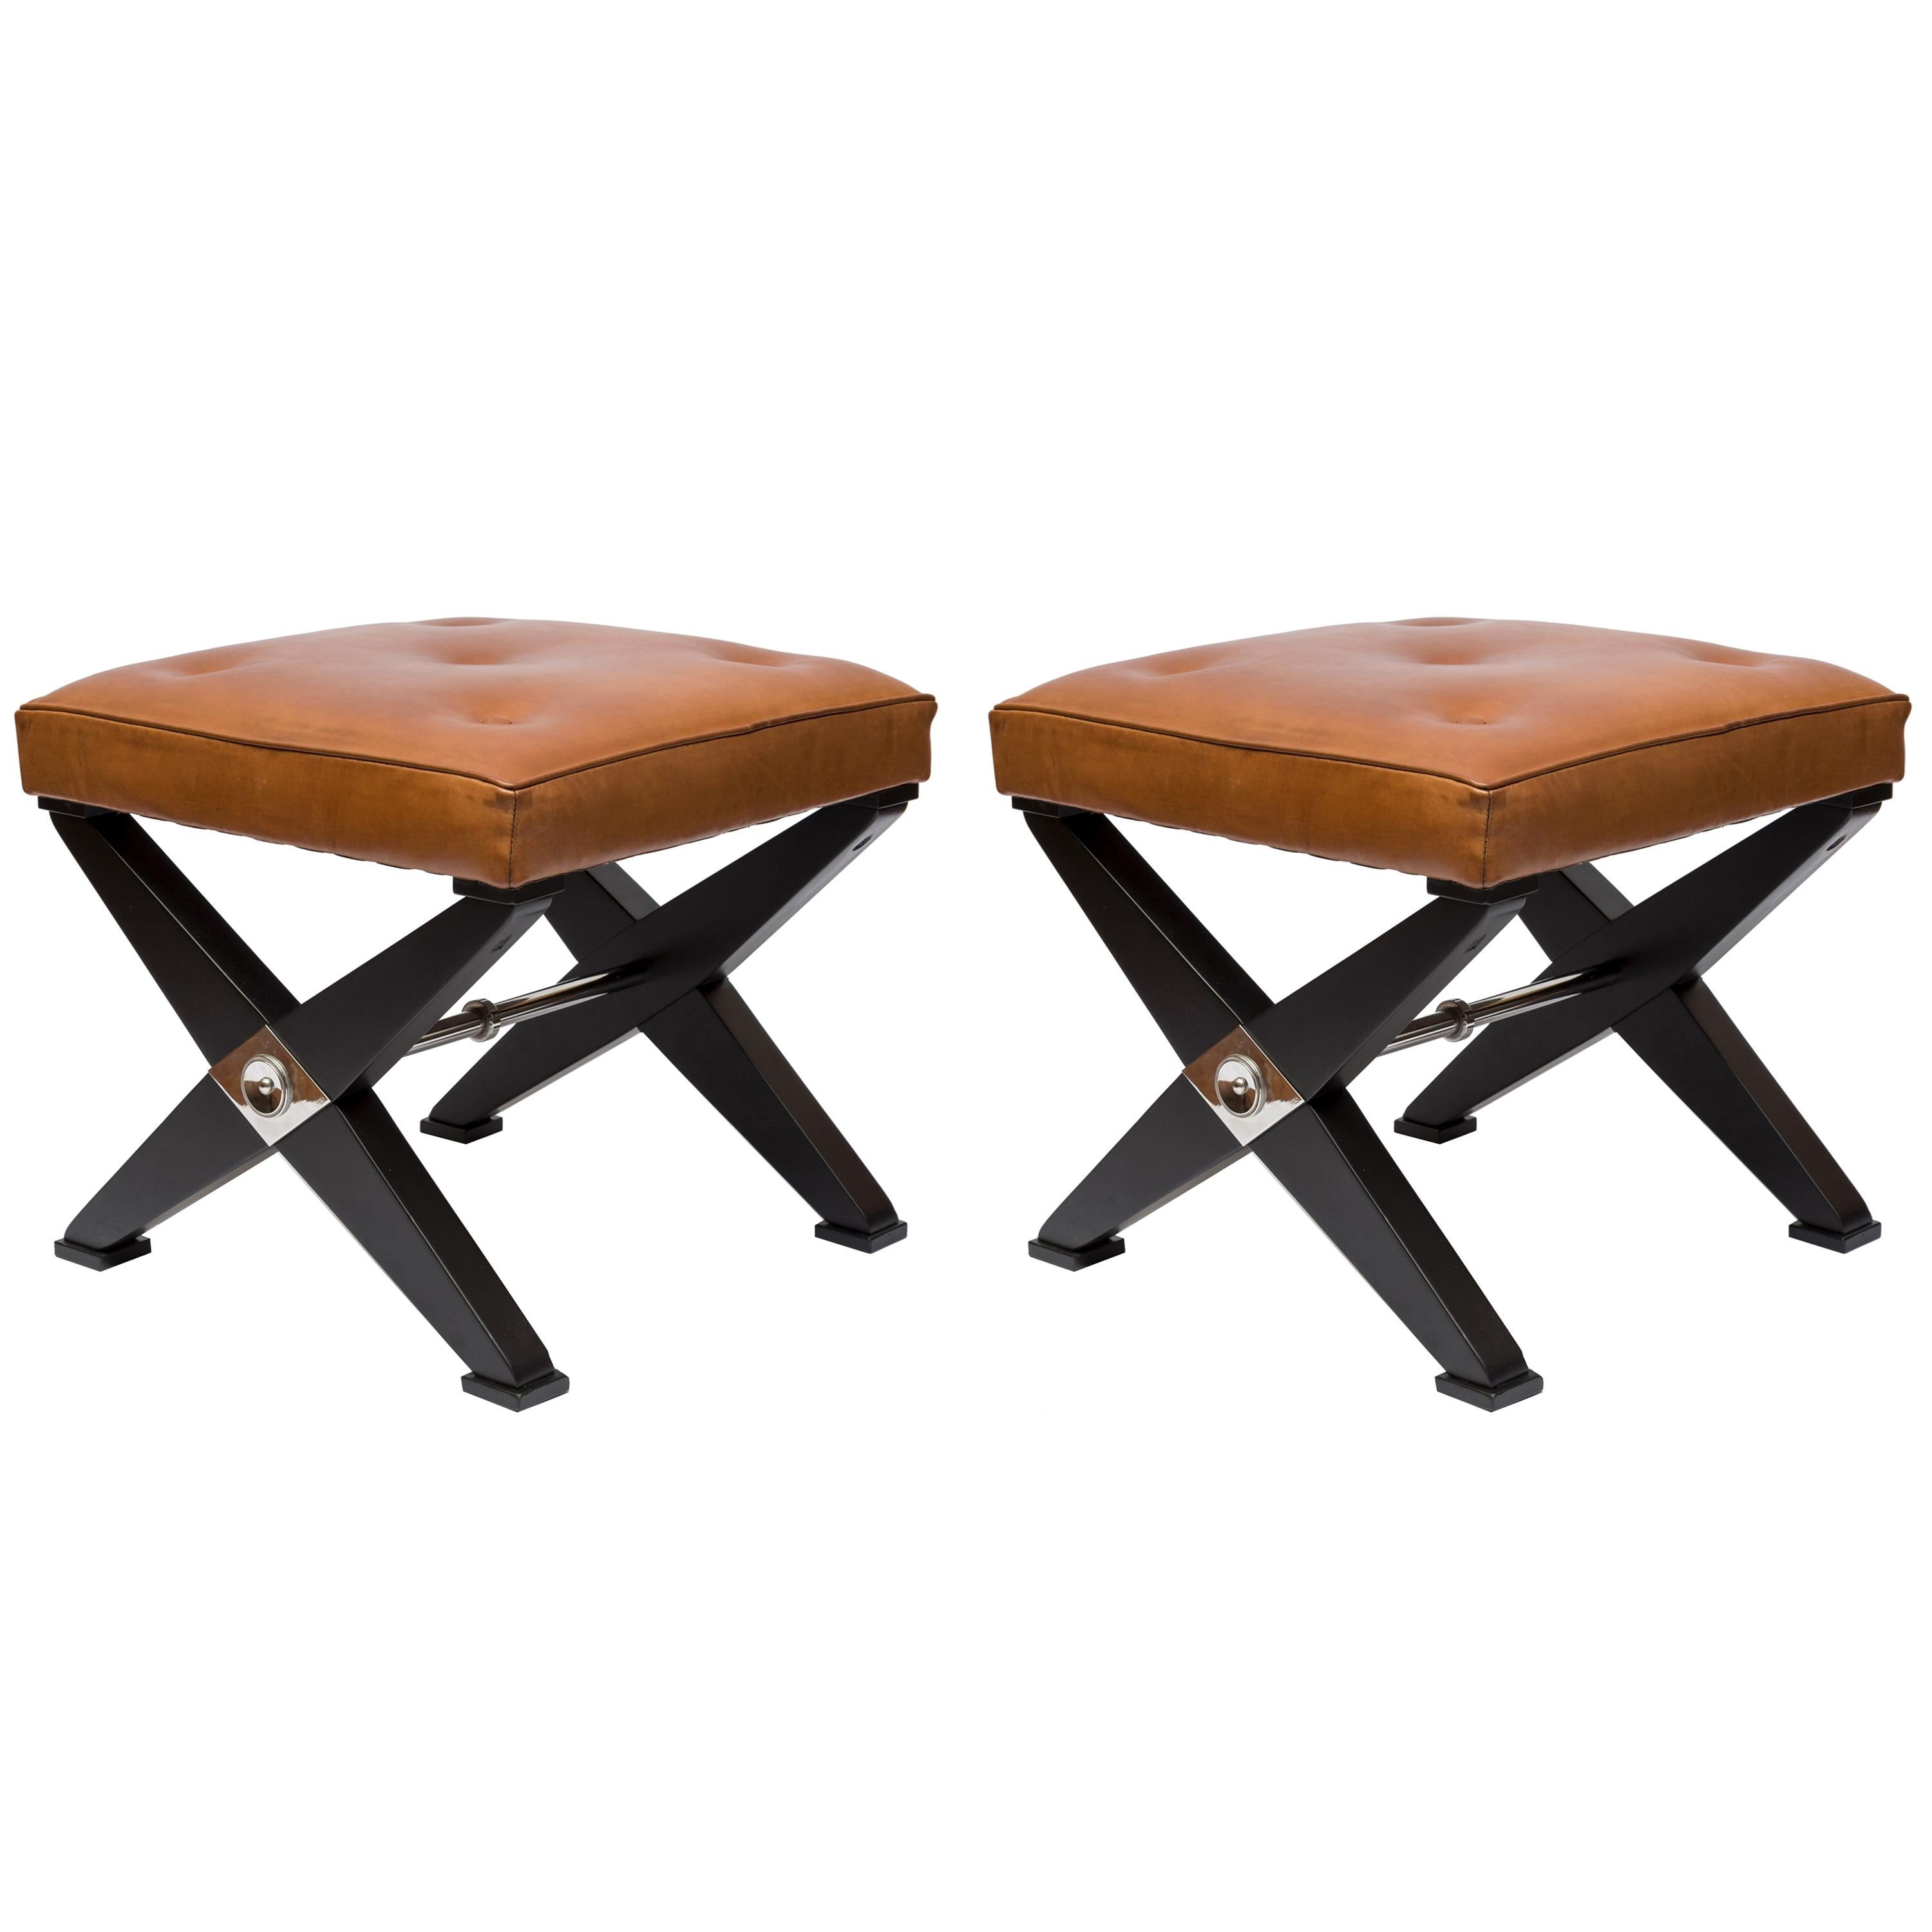 Pair of 1950s Neoclassic Stools in the Style of Jansen